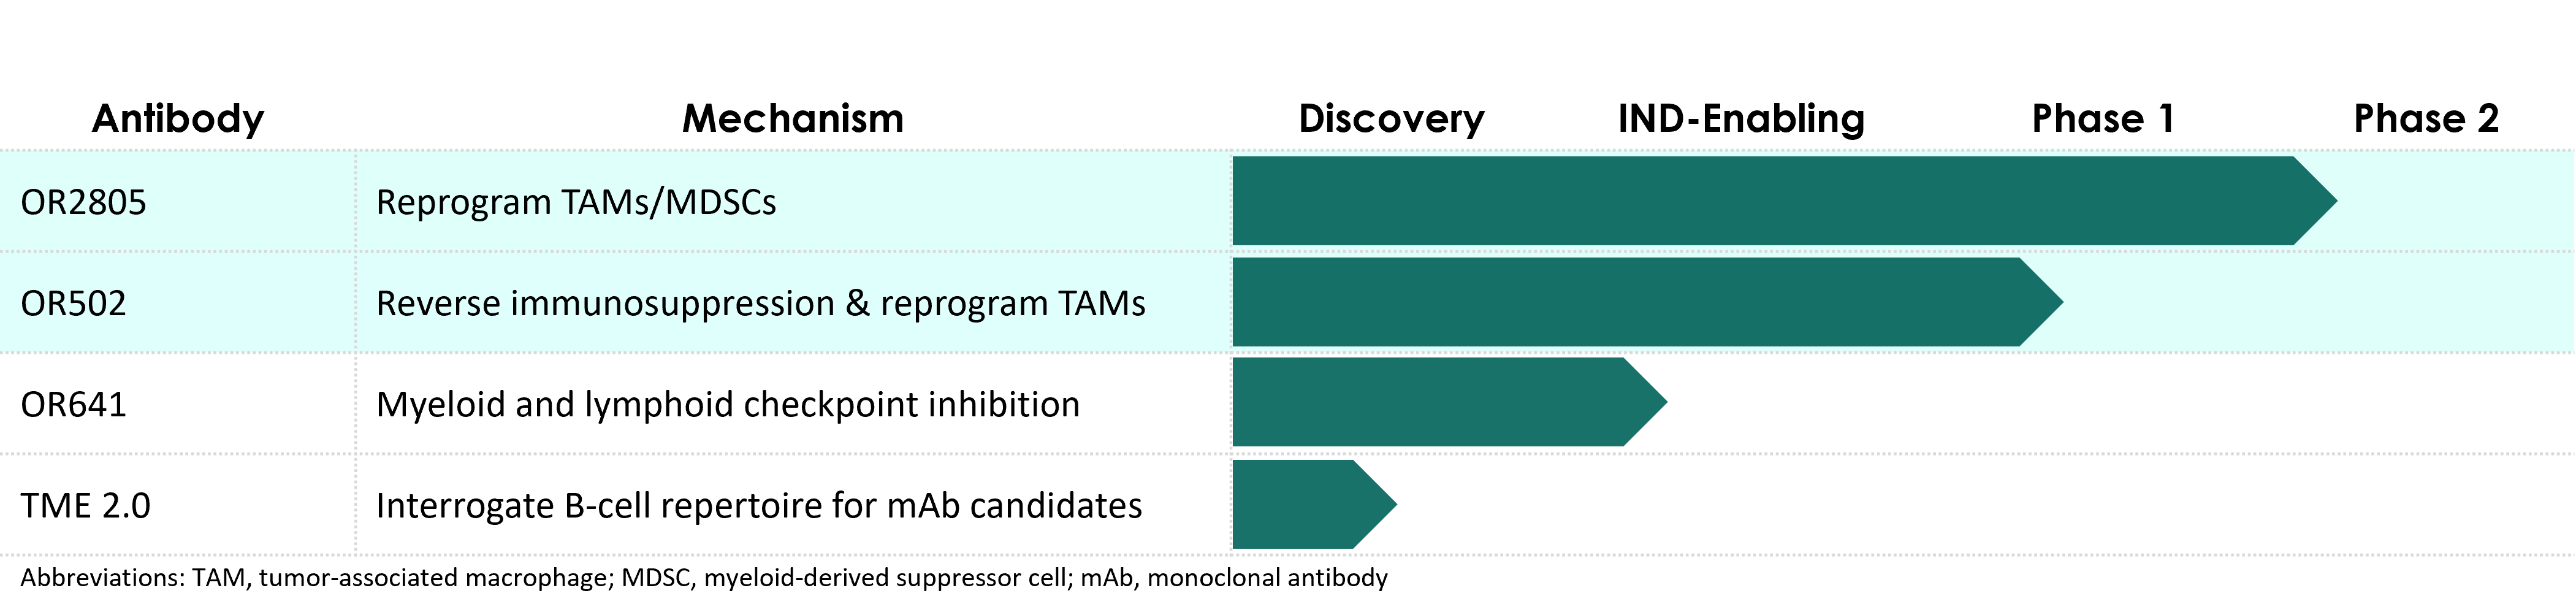 timeline of company antibodies in various stages of preclinical and clinical development advancement